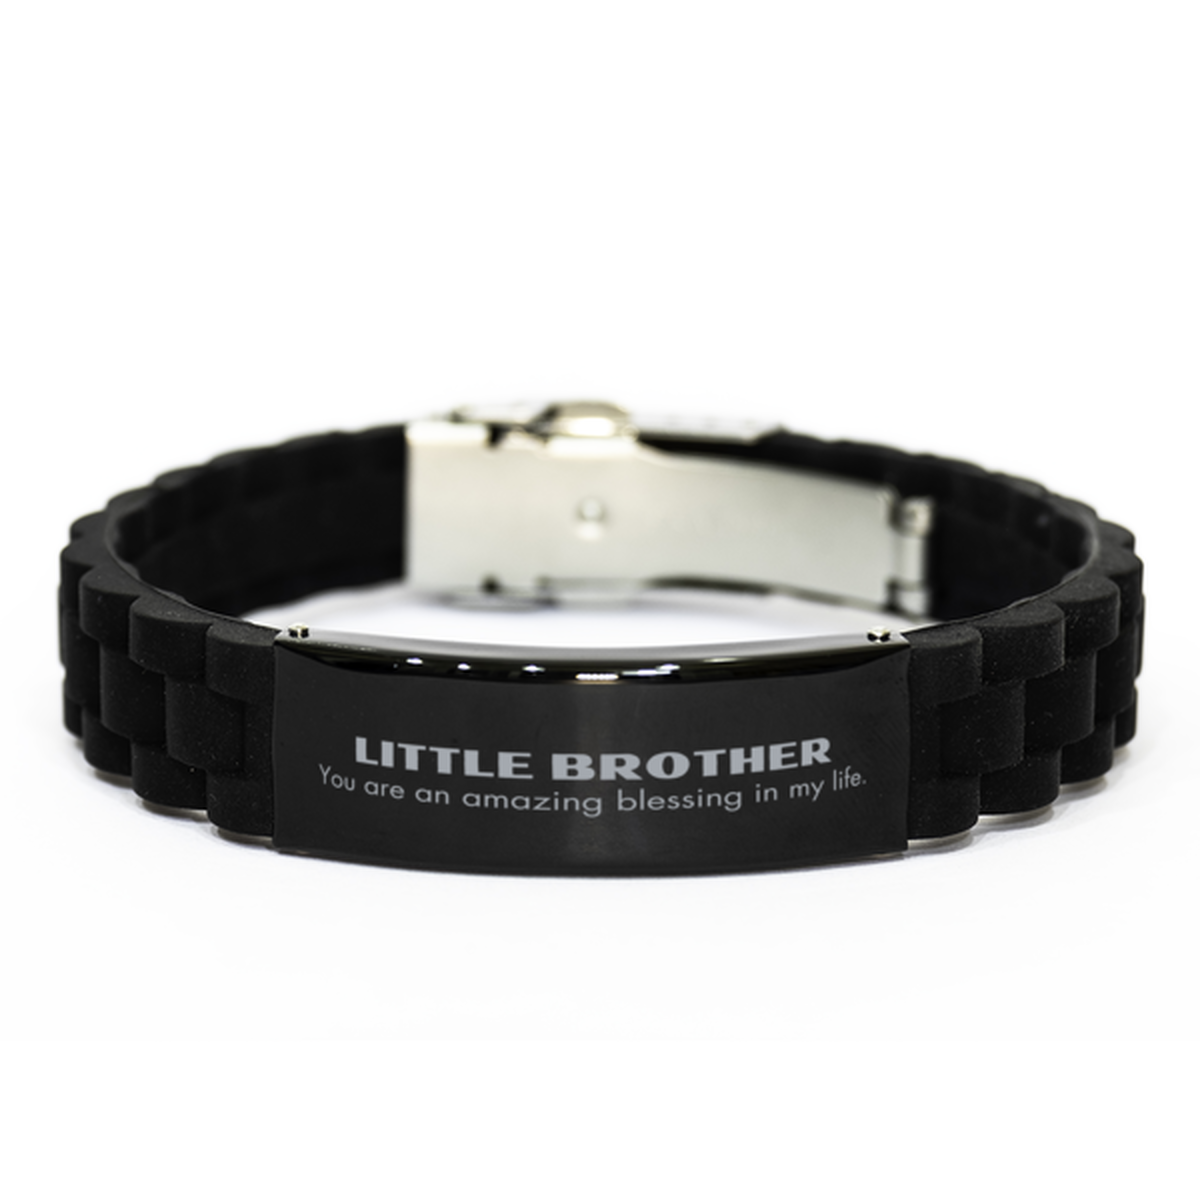 Little Brother Black Glidelock Clasp Bracelet, You are an amazing blessing in my life, Thank You Gifts For Little Brother, Inspirational Birthday Christmas Unique Gifts For Little Brother